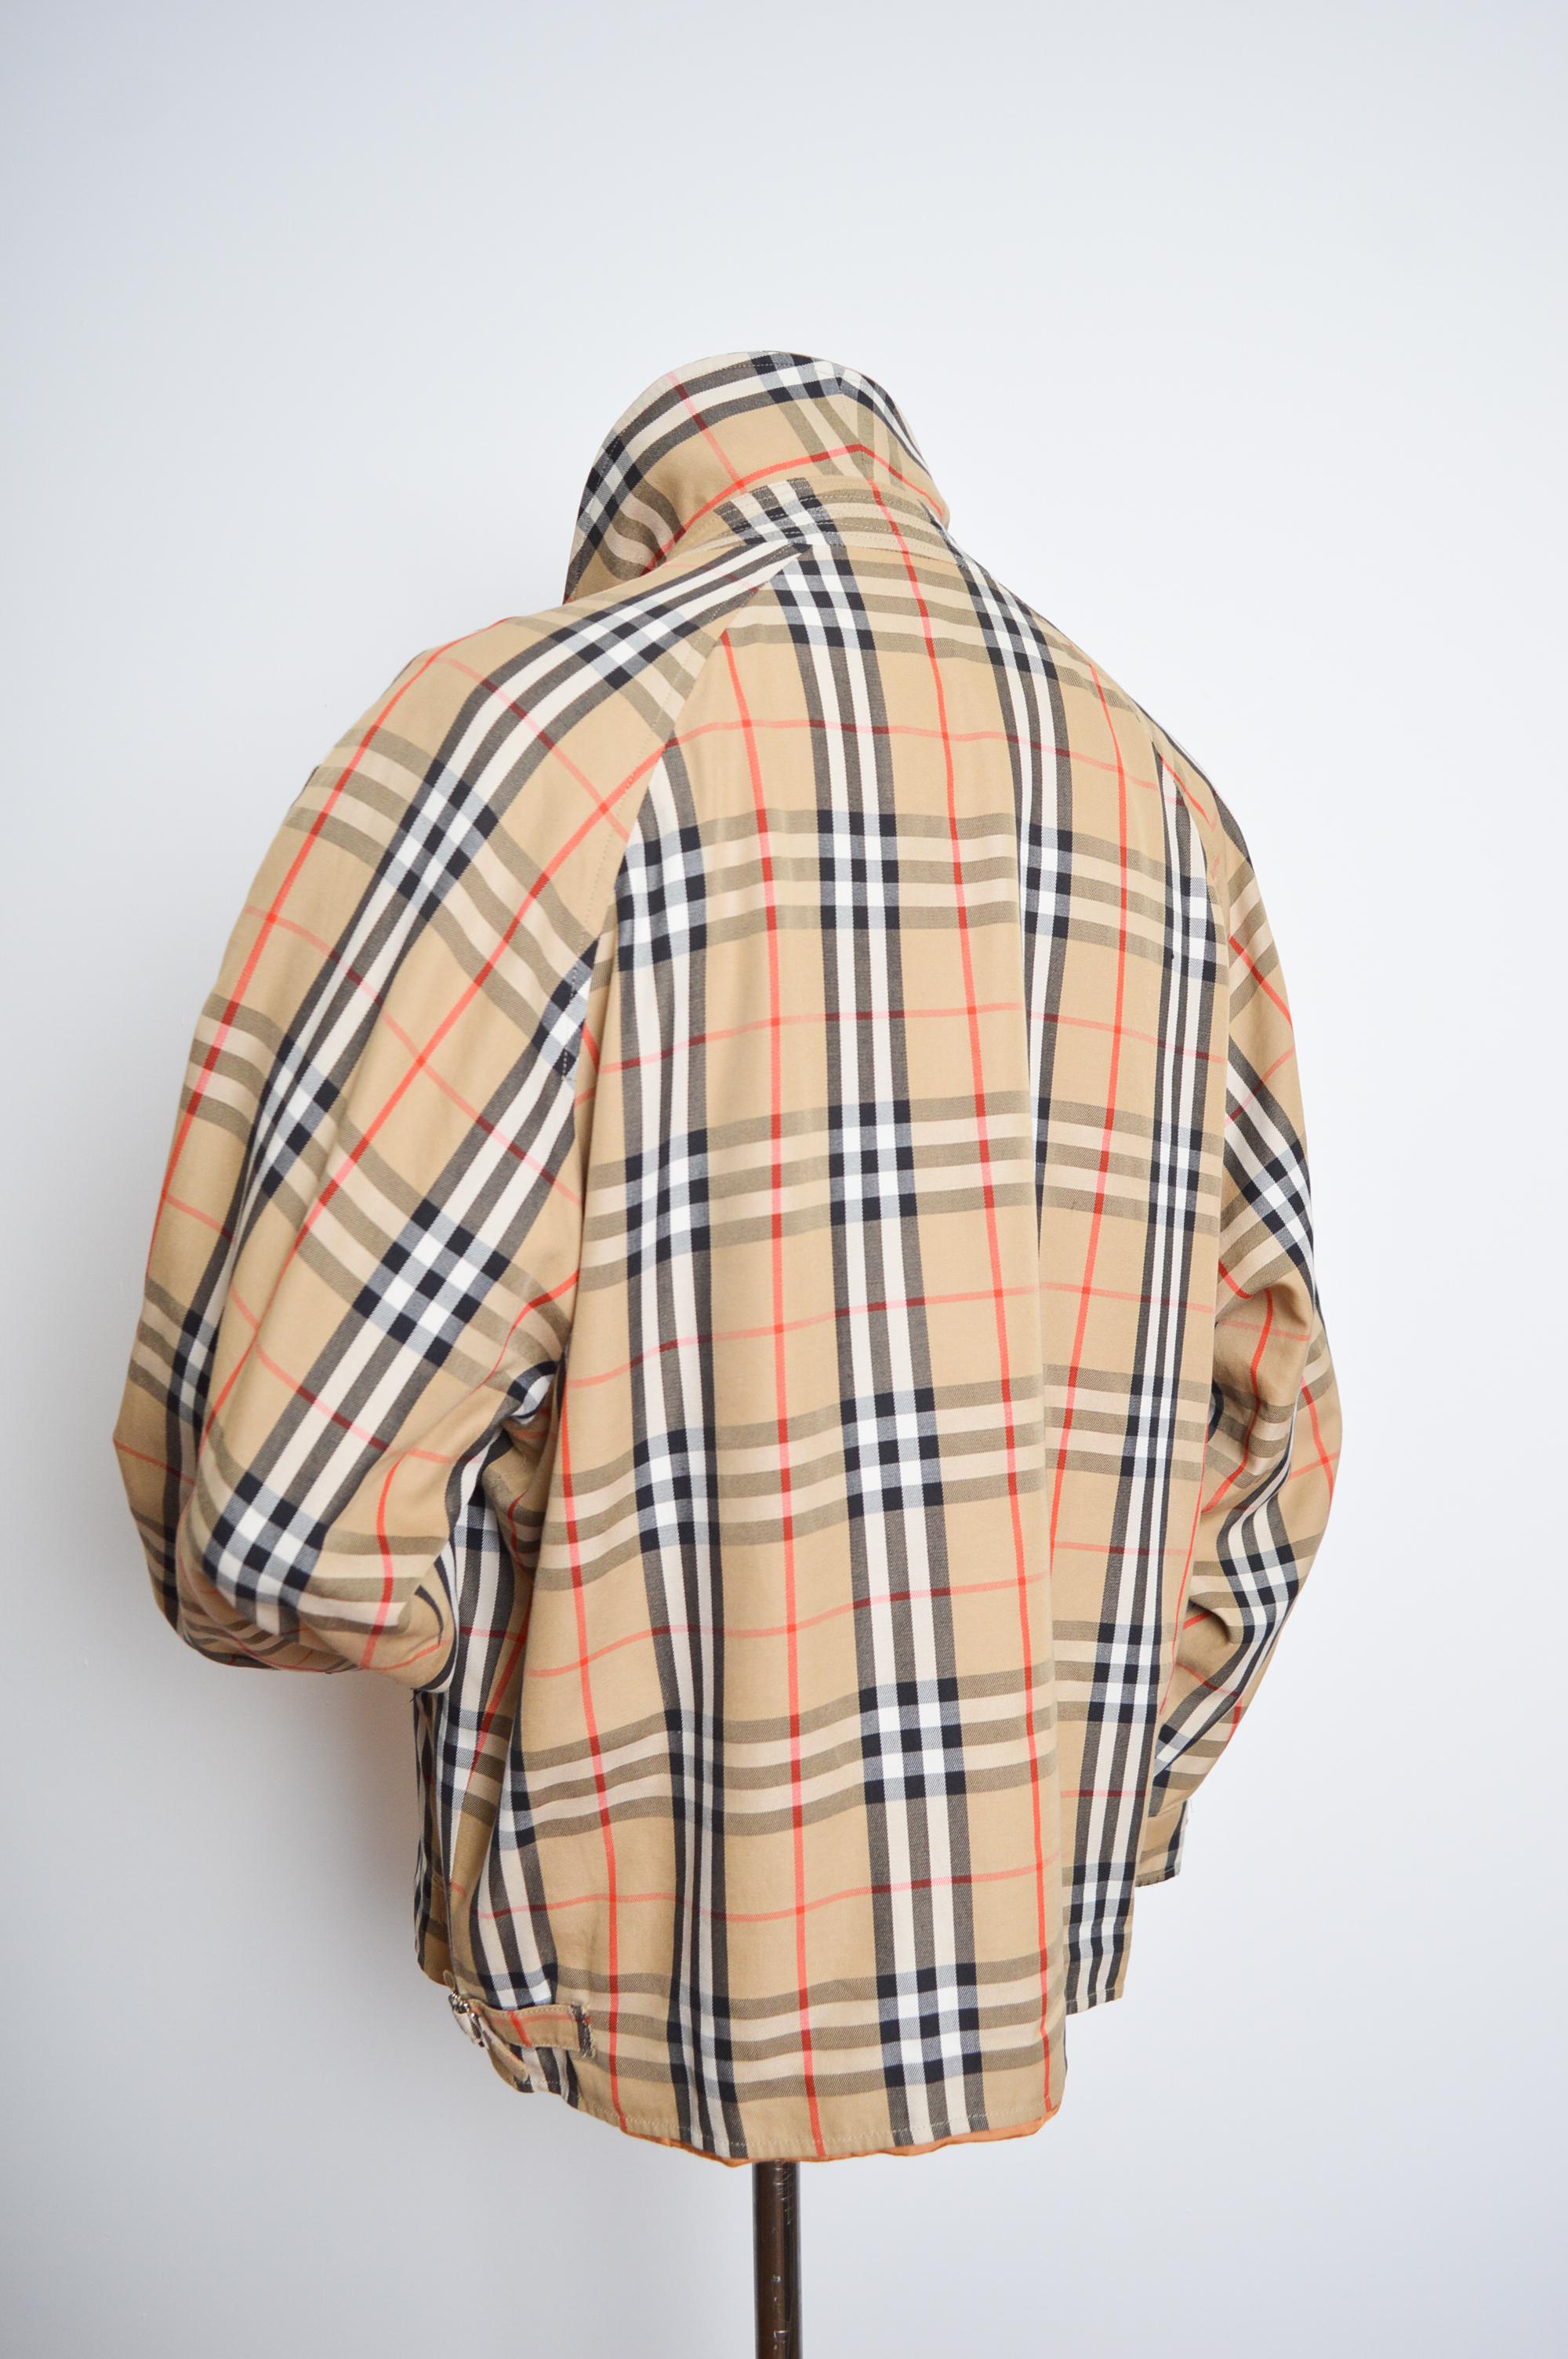 Superb Vintage BURBERRY's of London, Harrington jacket in the Iconic Nova Check.
Circa 1980. 

MADE IN ENGLAND.  

Features: Oversized loose fit, Long sleeves, central line zip fasten closure, 2 hip pockets, Caramel coloured acetate